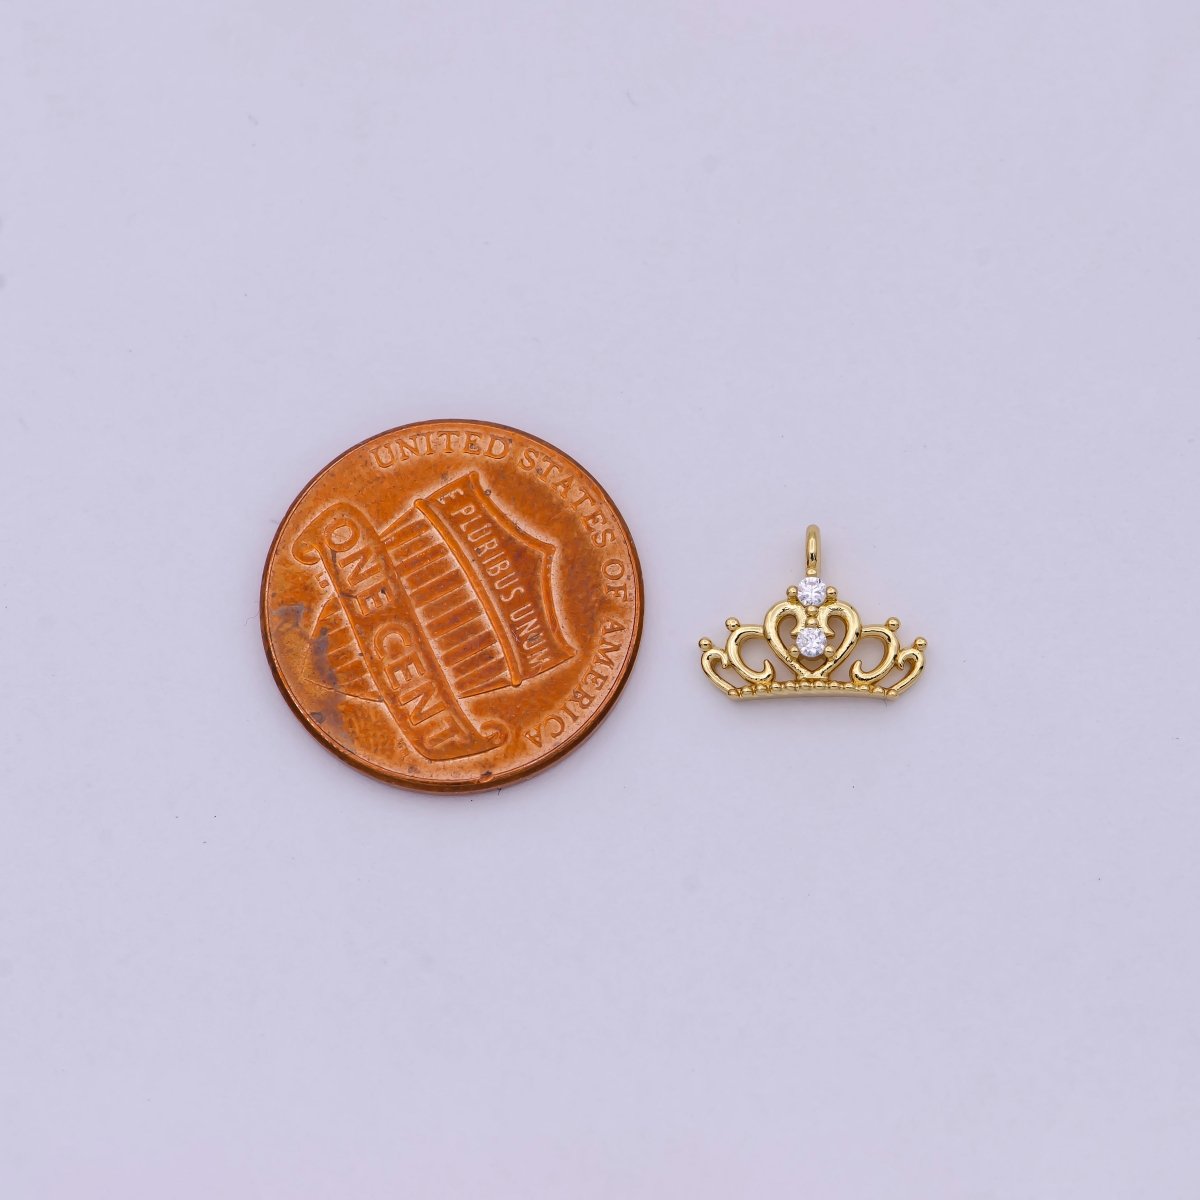 Mini Silver Princess Tiara Charm - Gold Princess Crown Charm for Necklace or Bracelet Component N-449 N-450 - DLUXCA